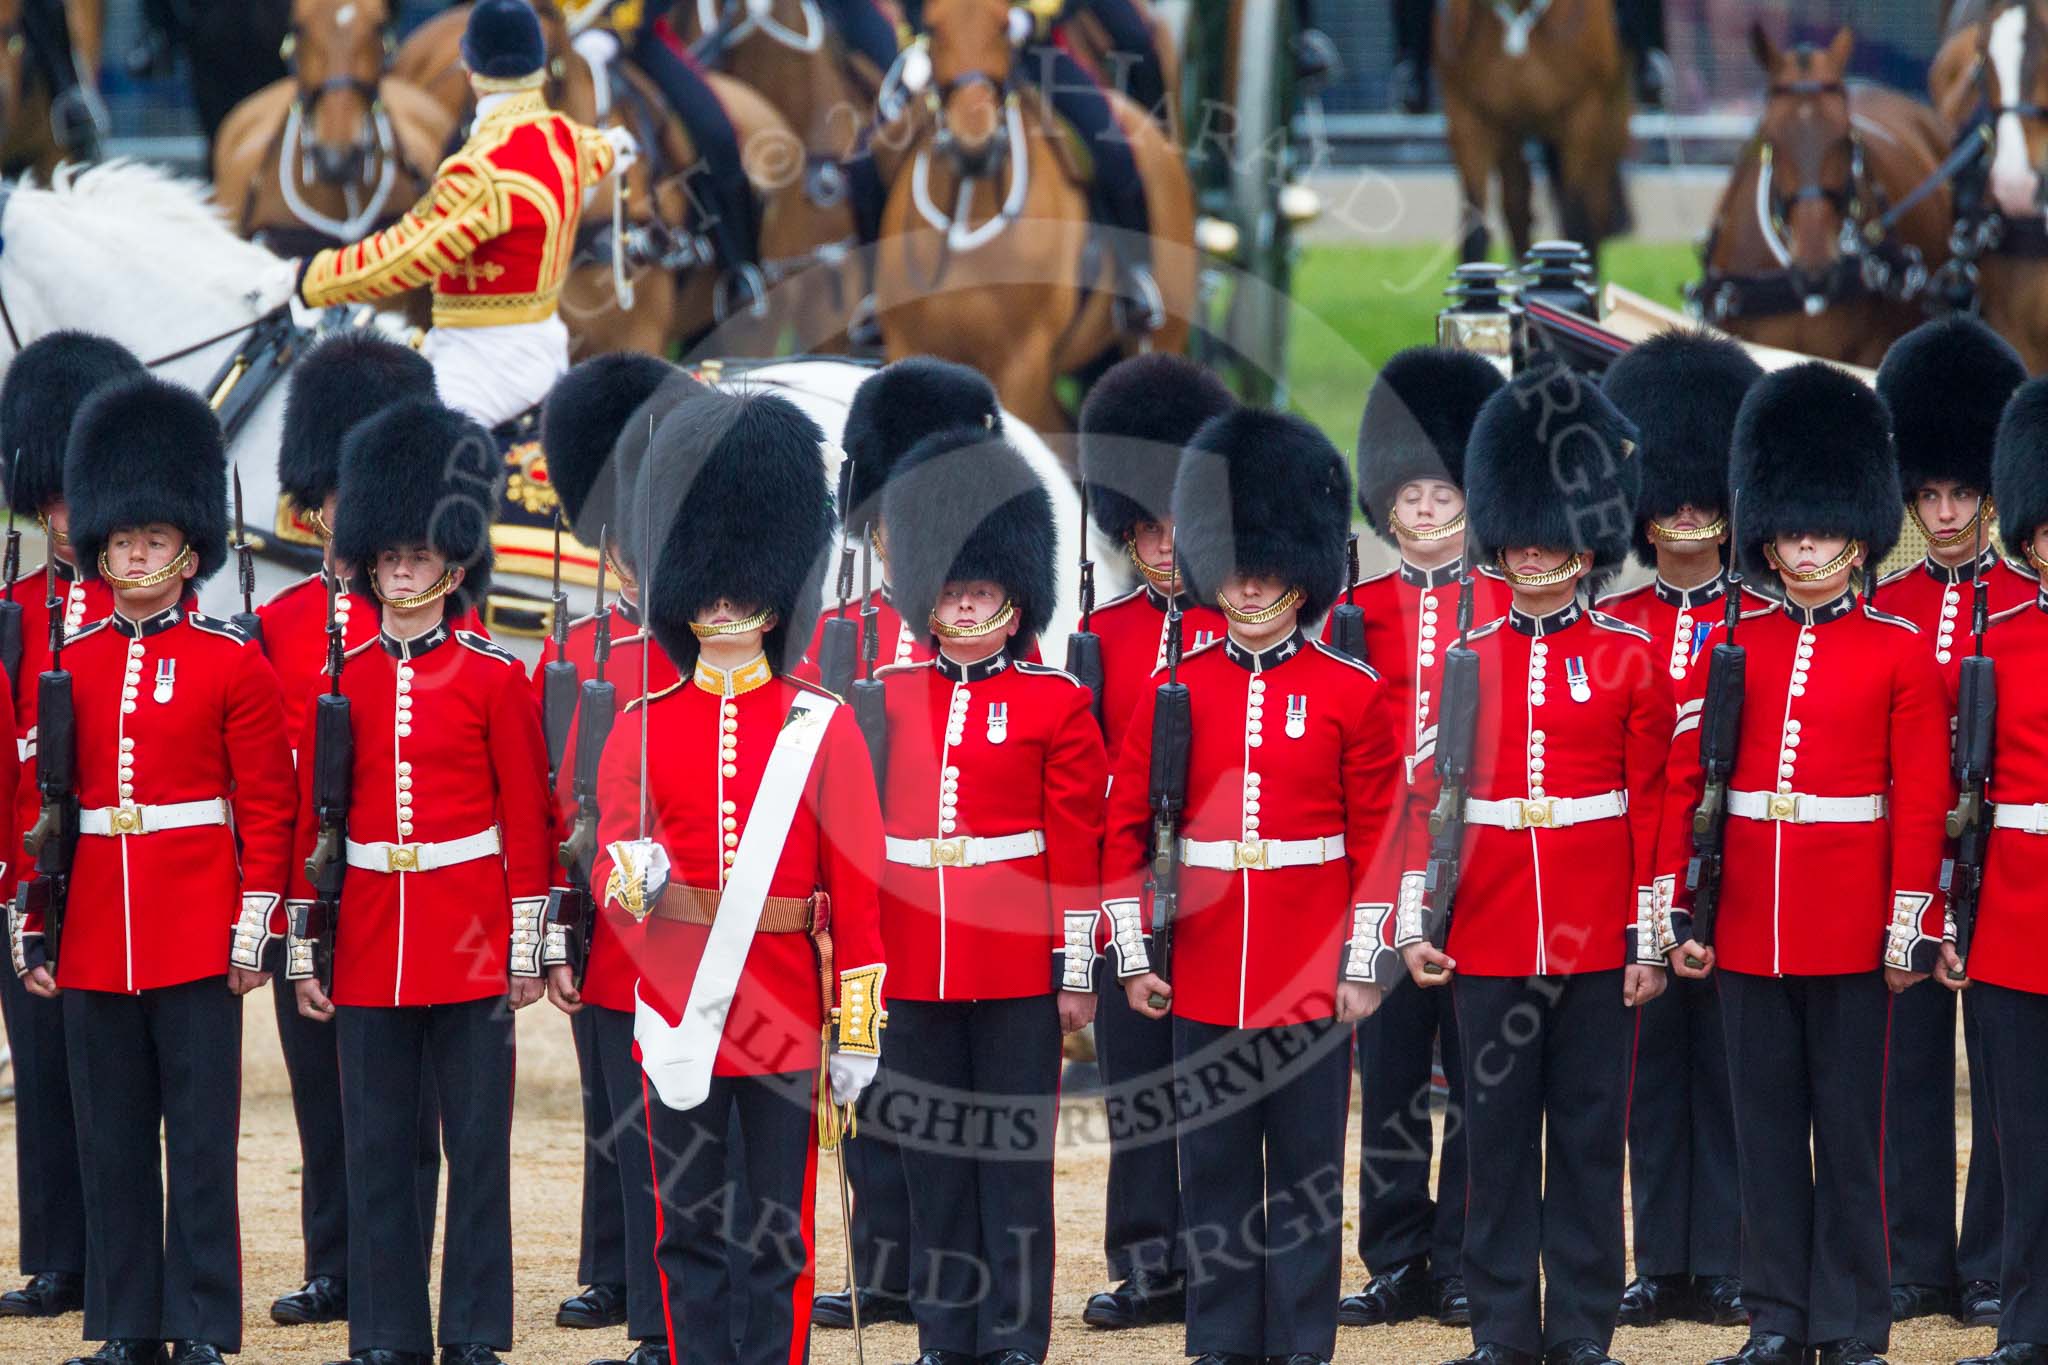 Trooping the Colour 2015. Image #287, 13 June 2015 11:04 Horse Guards Parade, London, UK